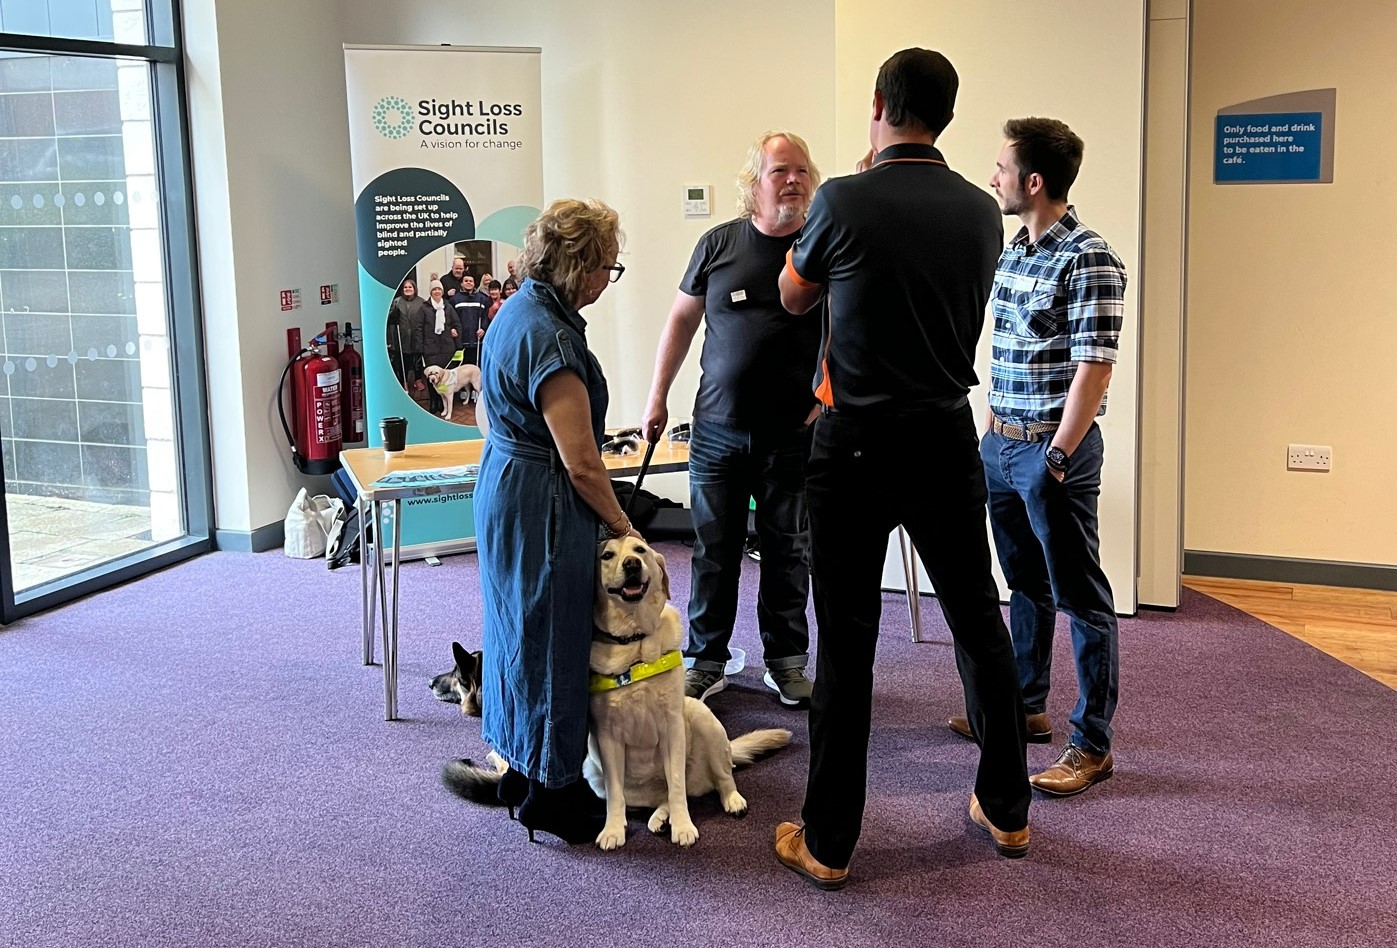 Birmingham SLC members and Places Leisure staff standing in a circle, deep in conversation. A lady is holding her guide dog.